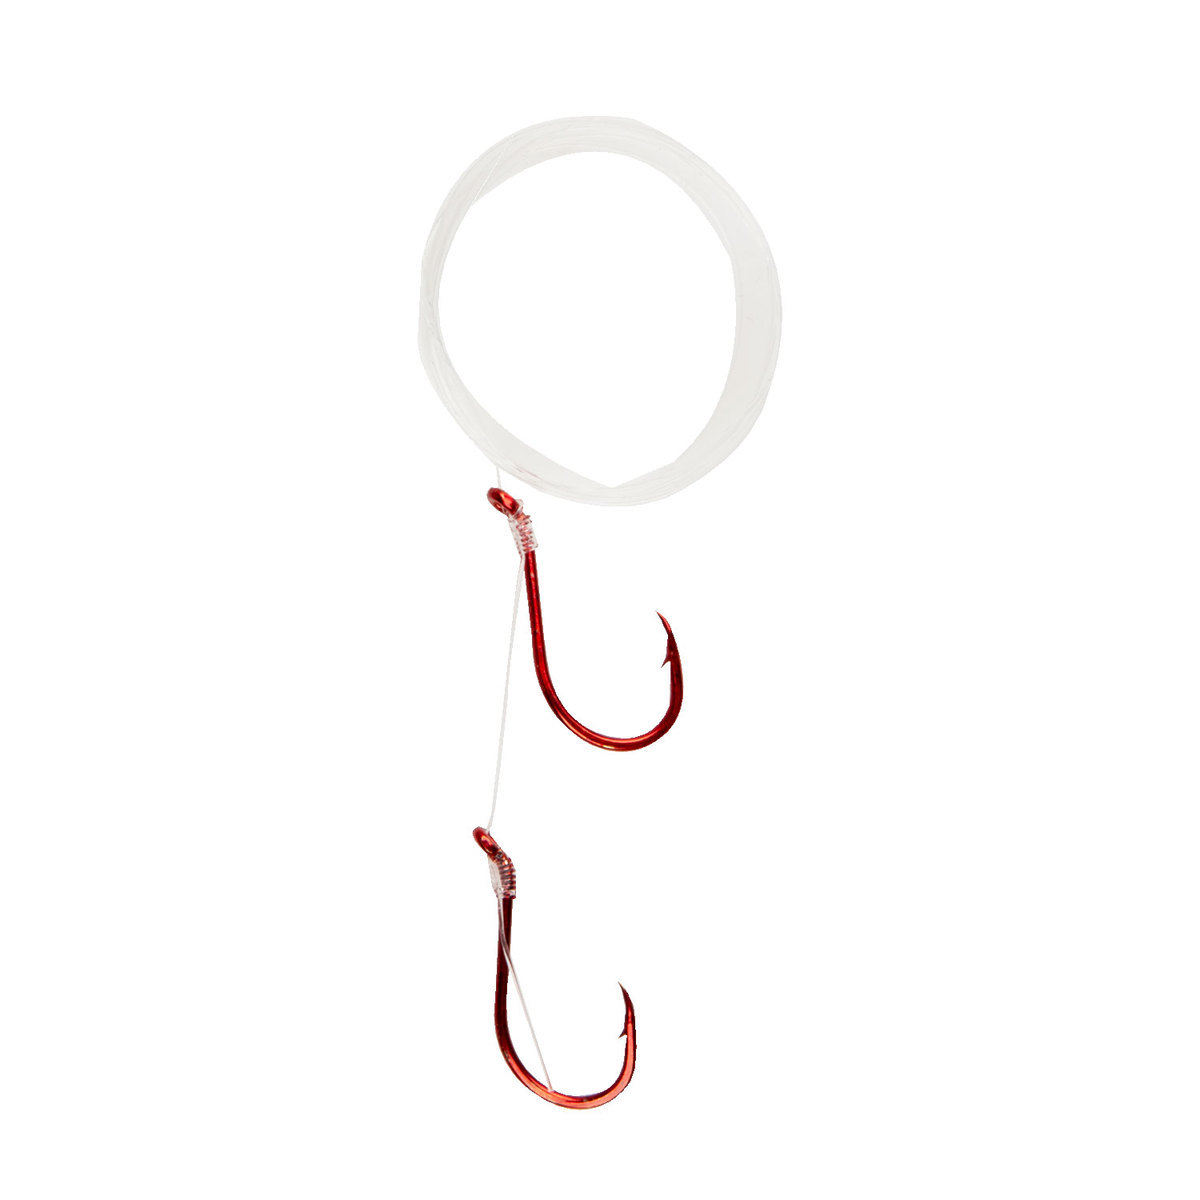 Do you prefer, Octopus circle hooks or Double action circle hooks